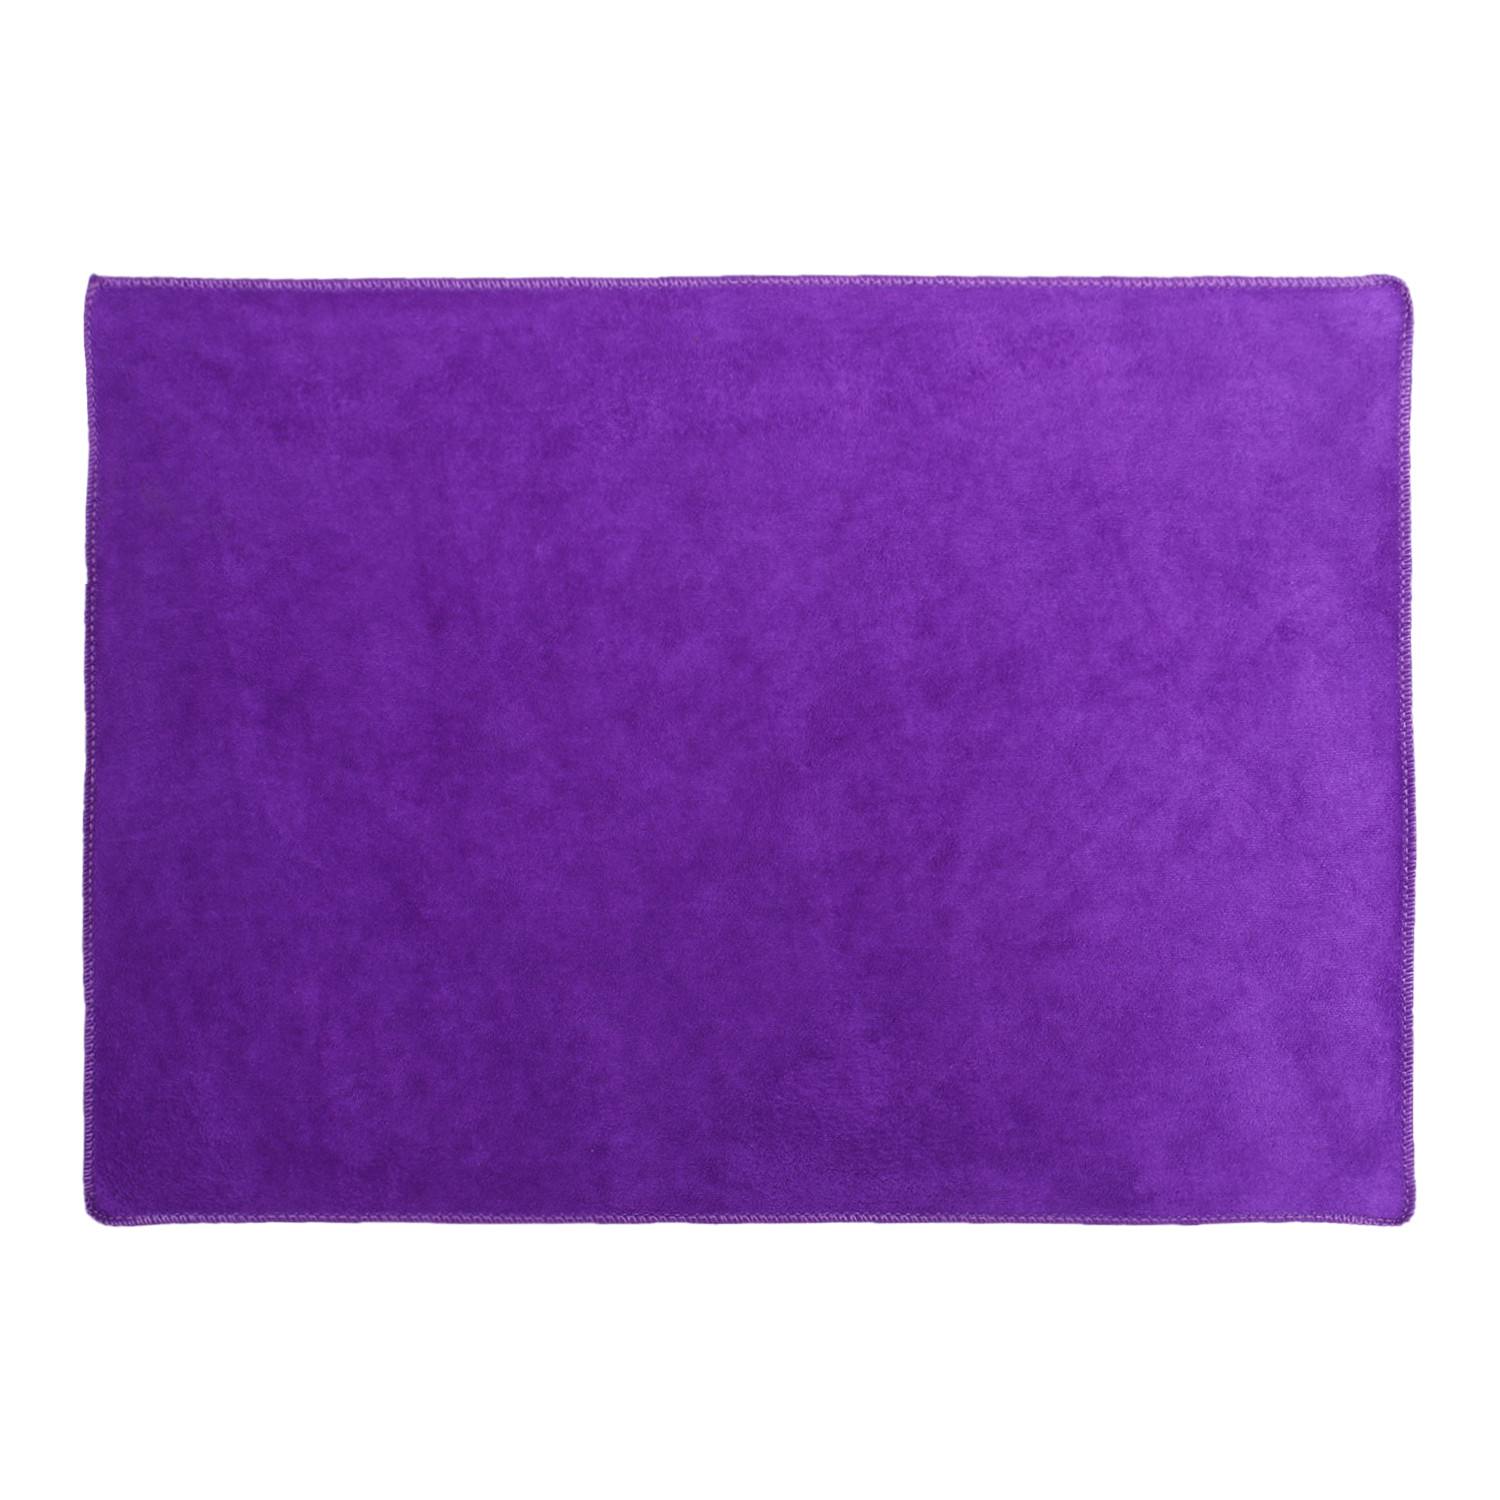 Kuber Industries Cleaning Cloths|Microfiber Highly Absorbent Wash Towels for Kitchen,Car,Window,24 x 16 Inch,Pack of 2 (Purple & Blue)